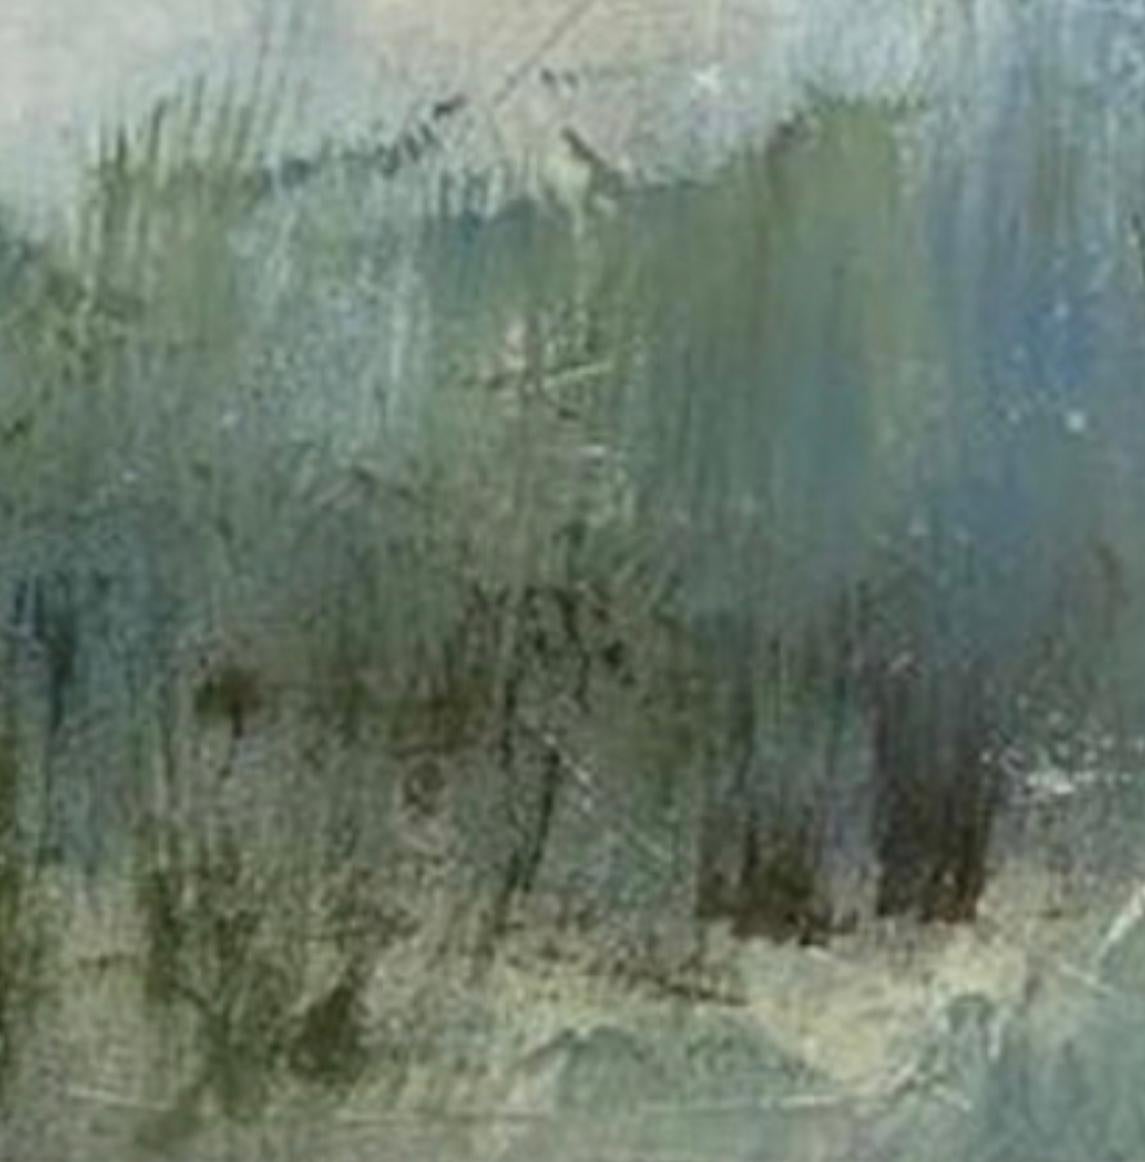 The marsh's brim, Contemporary marsh painting, green, blue, white - Gray Abstract Painting by Juanita Bellavance 